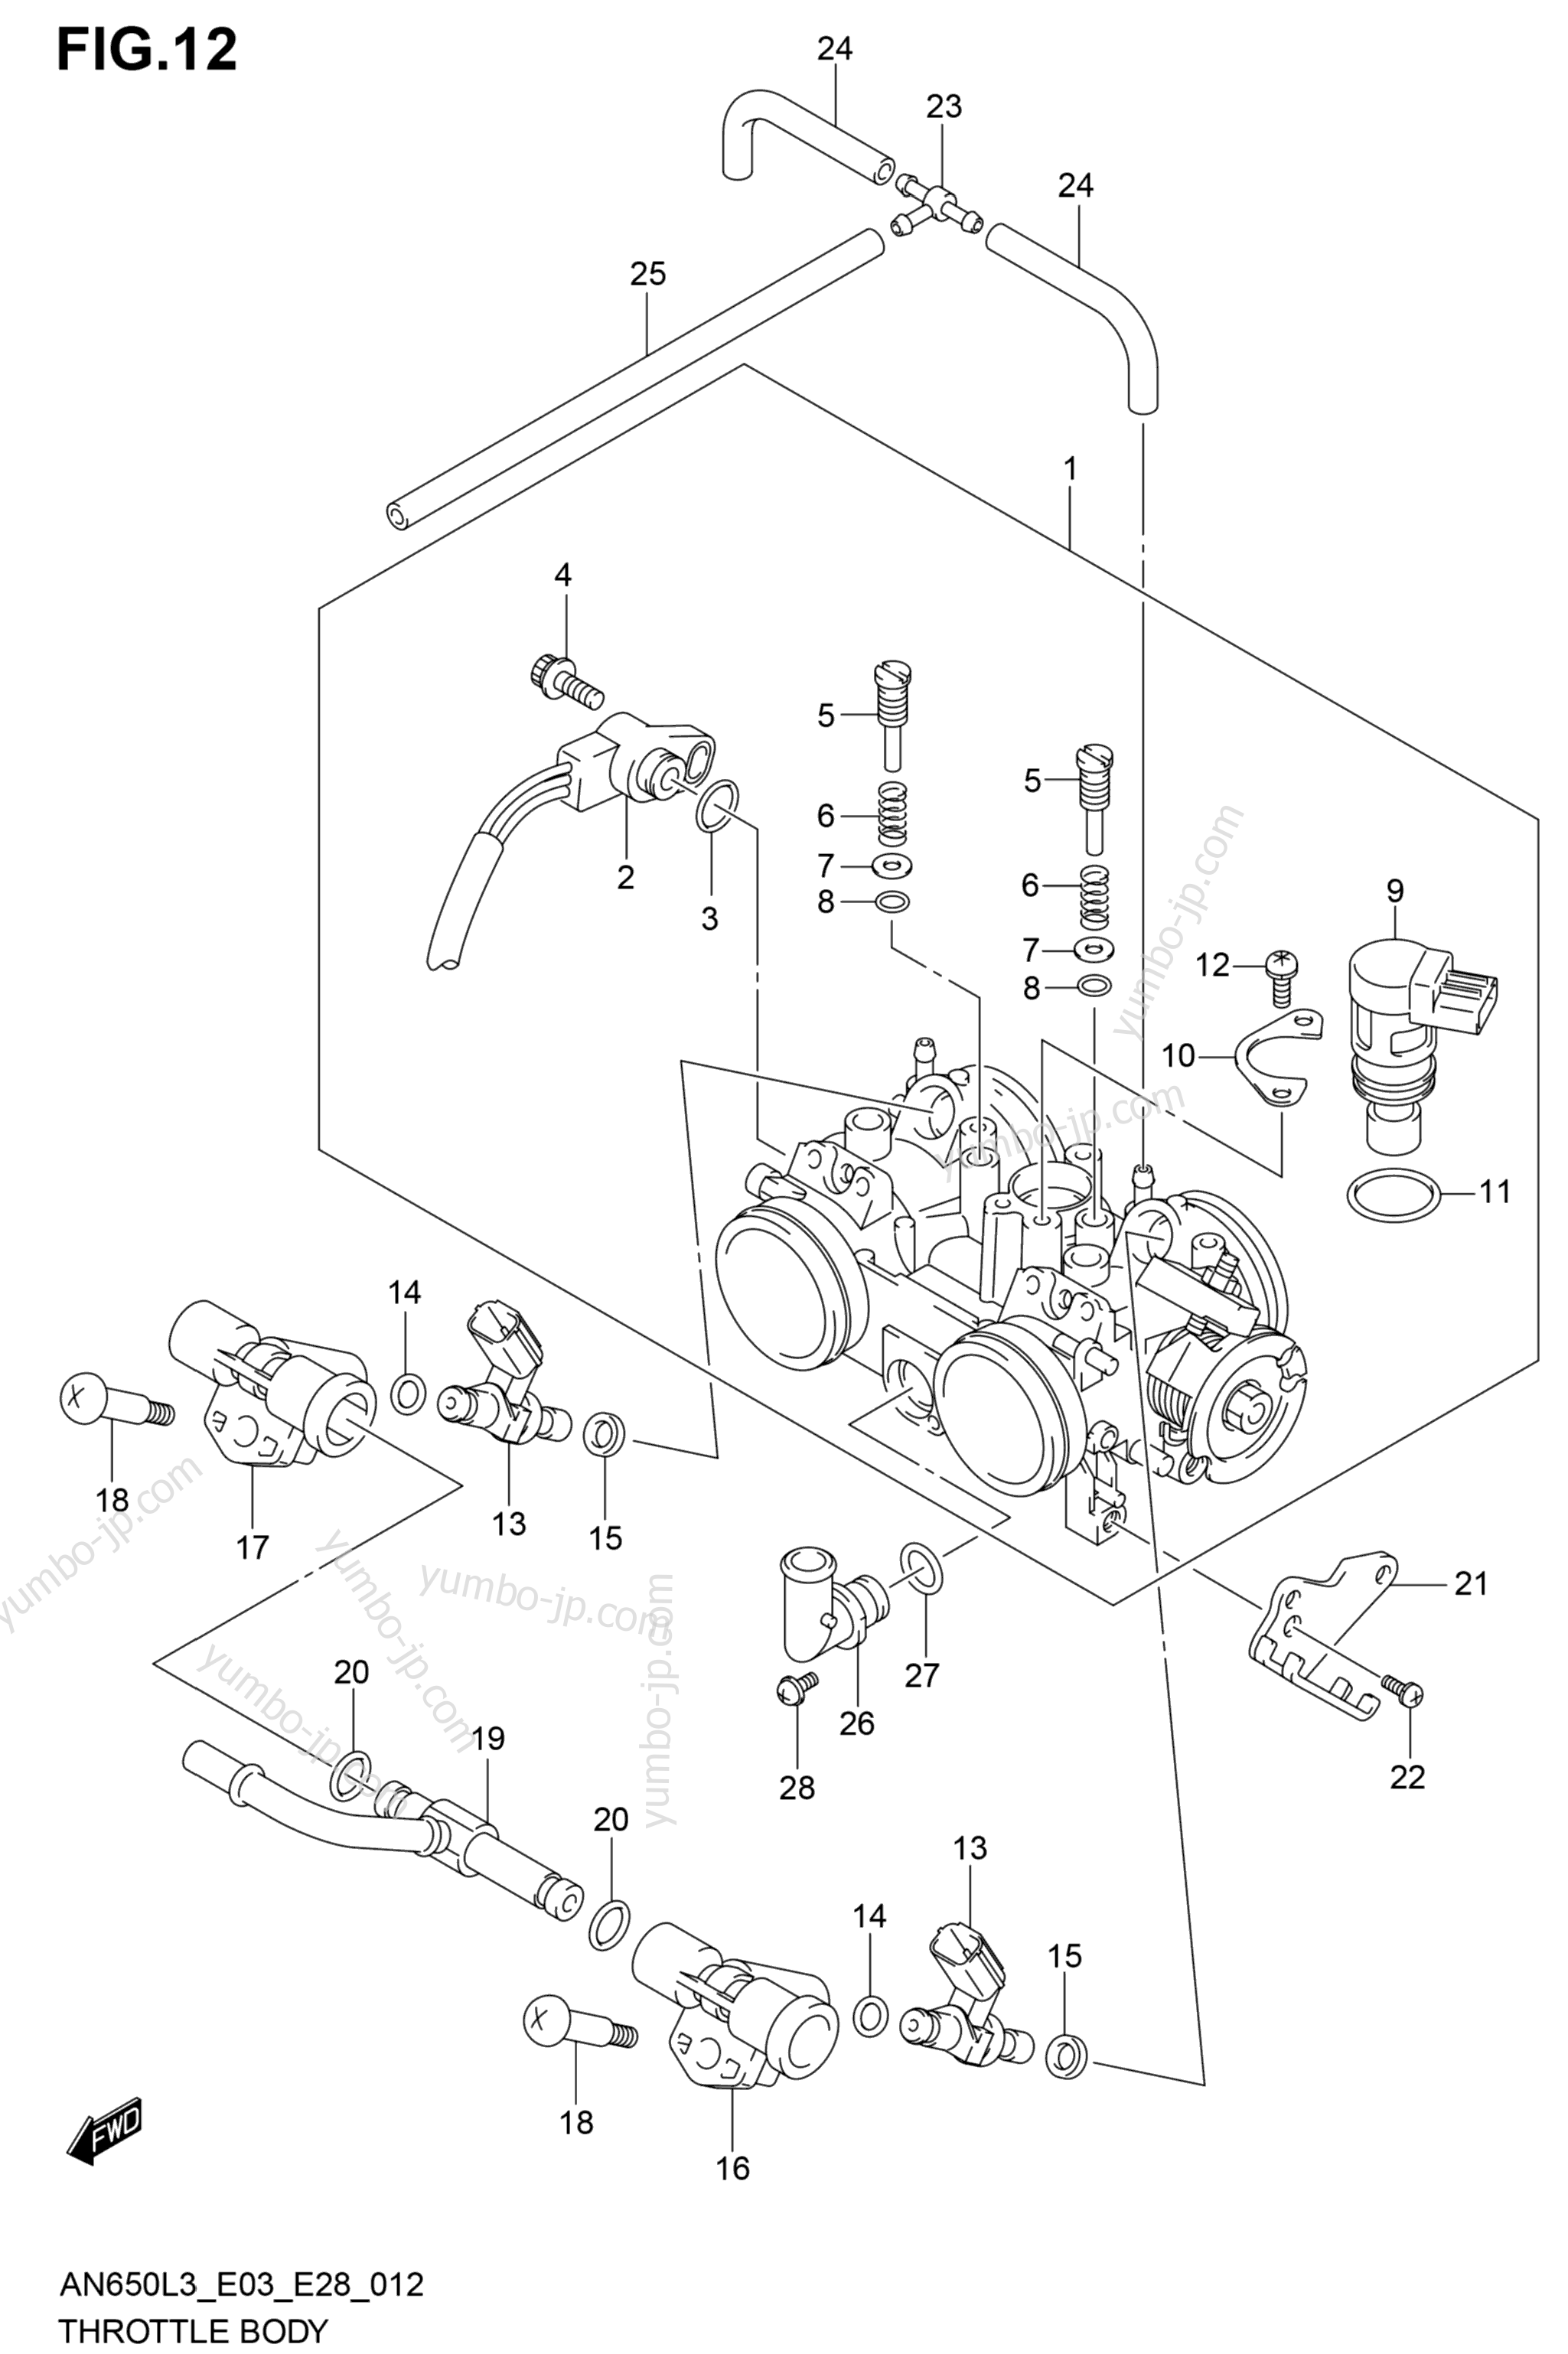 THROTTLE BODY (AN650L3 E03) for scooters SUZUKI AN650 2013 year